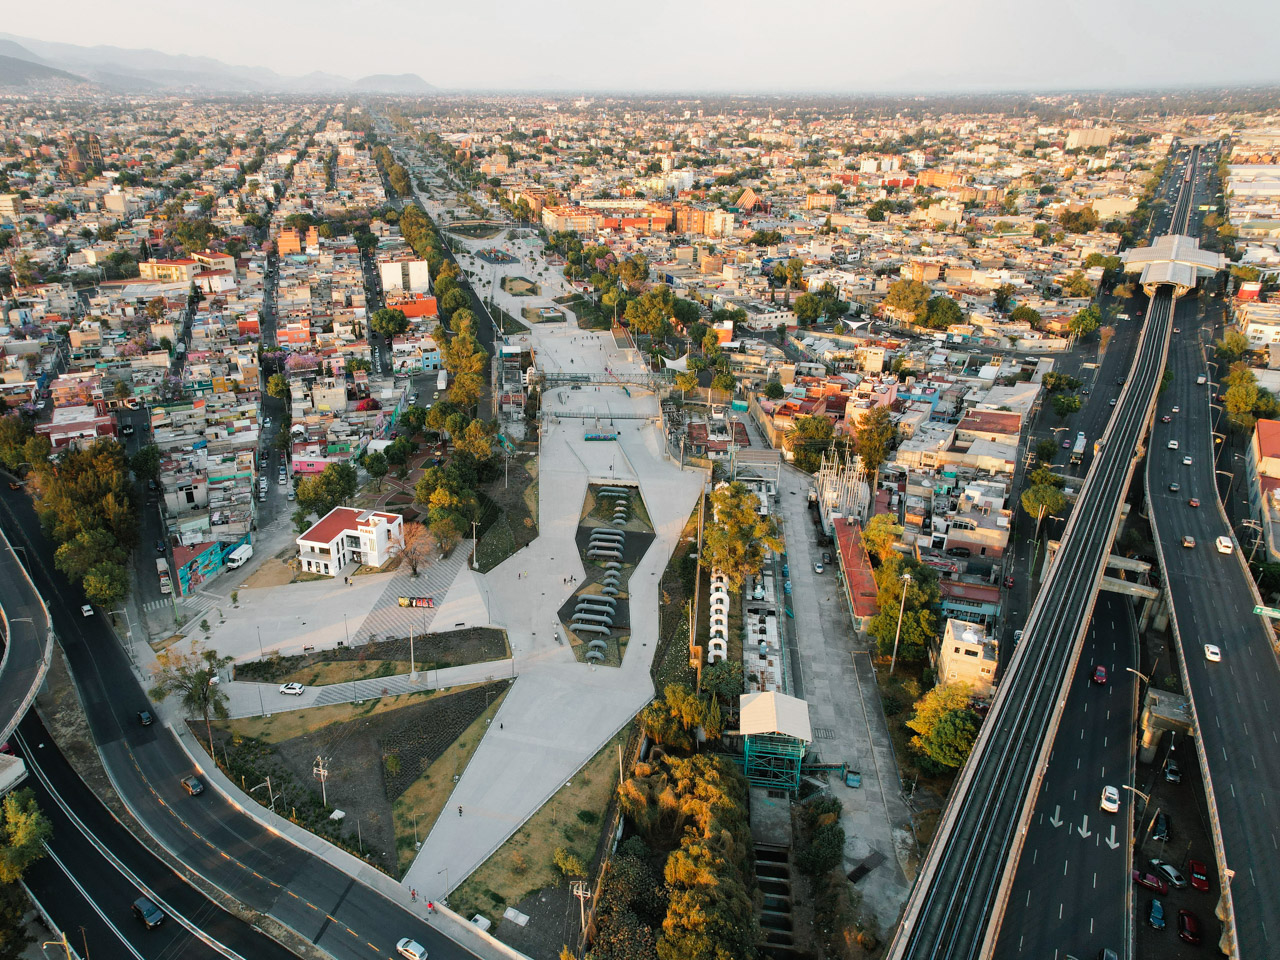 An aerial view showing Parque Lineal Gran Canal and a metro station in Mexico City